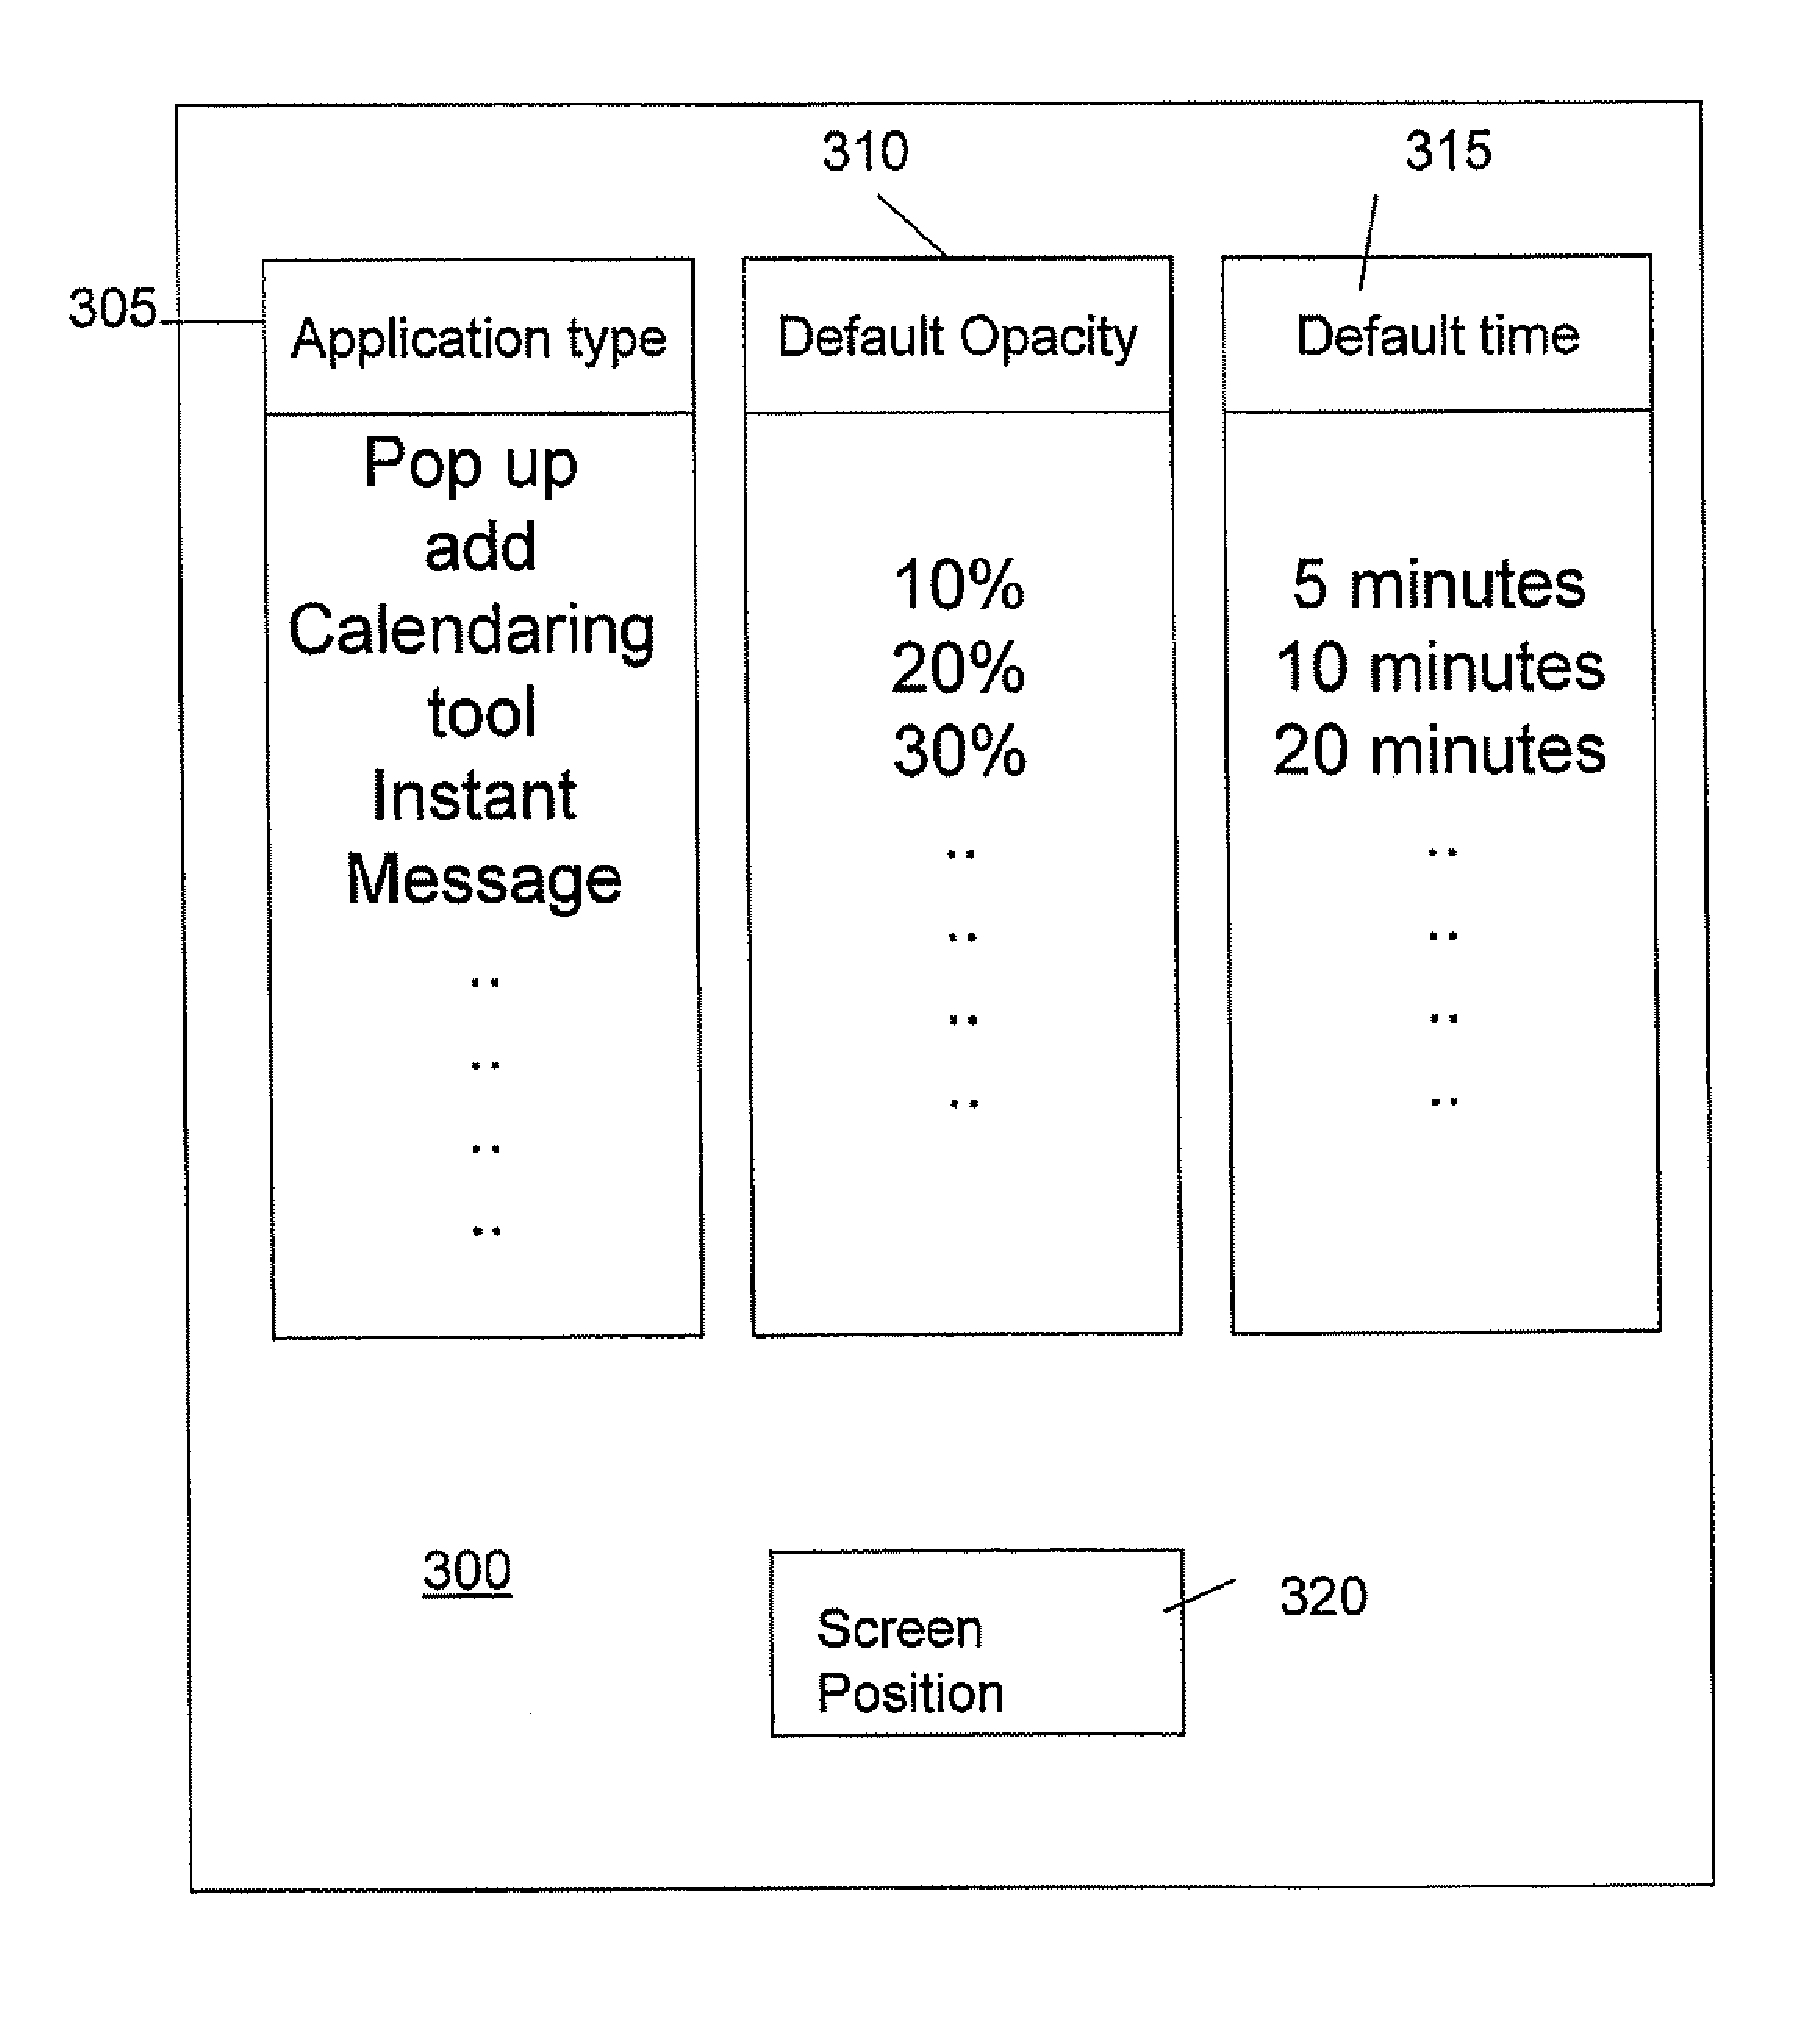 System and method of windows management